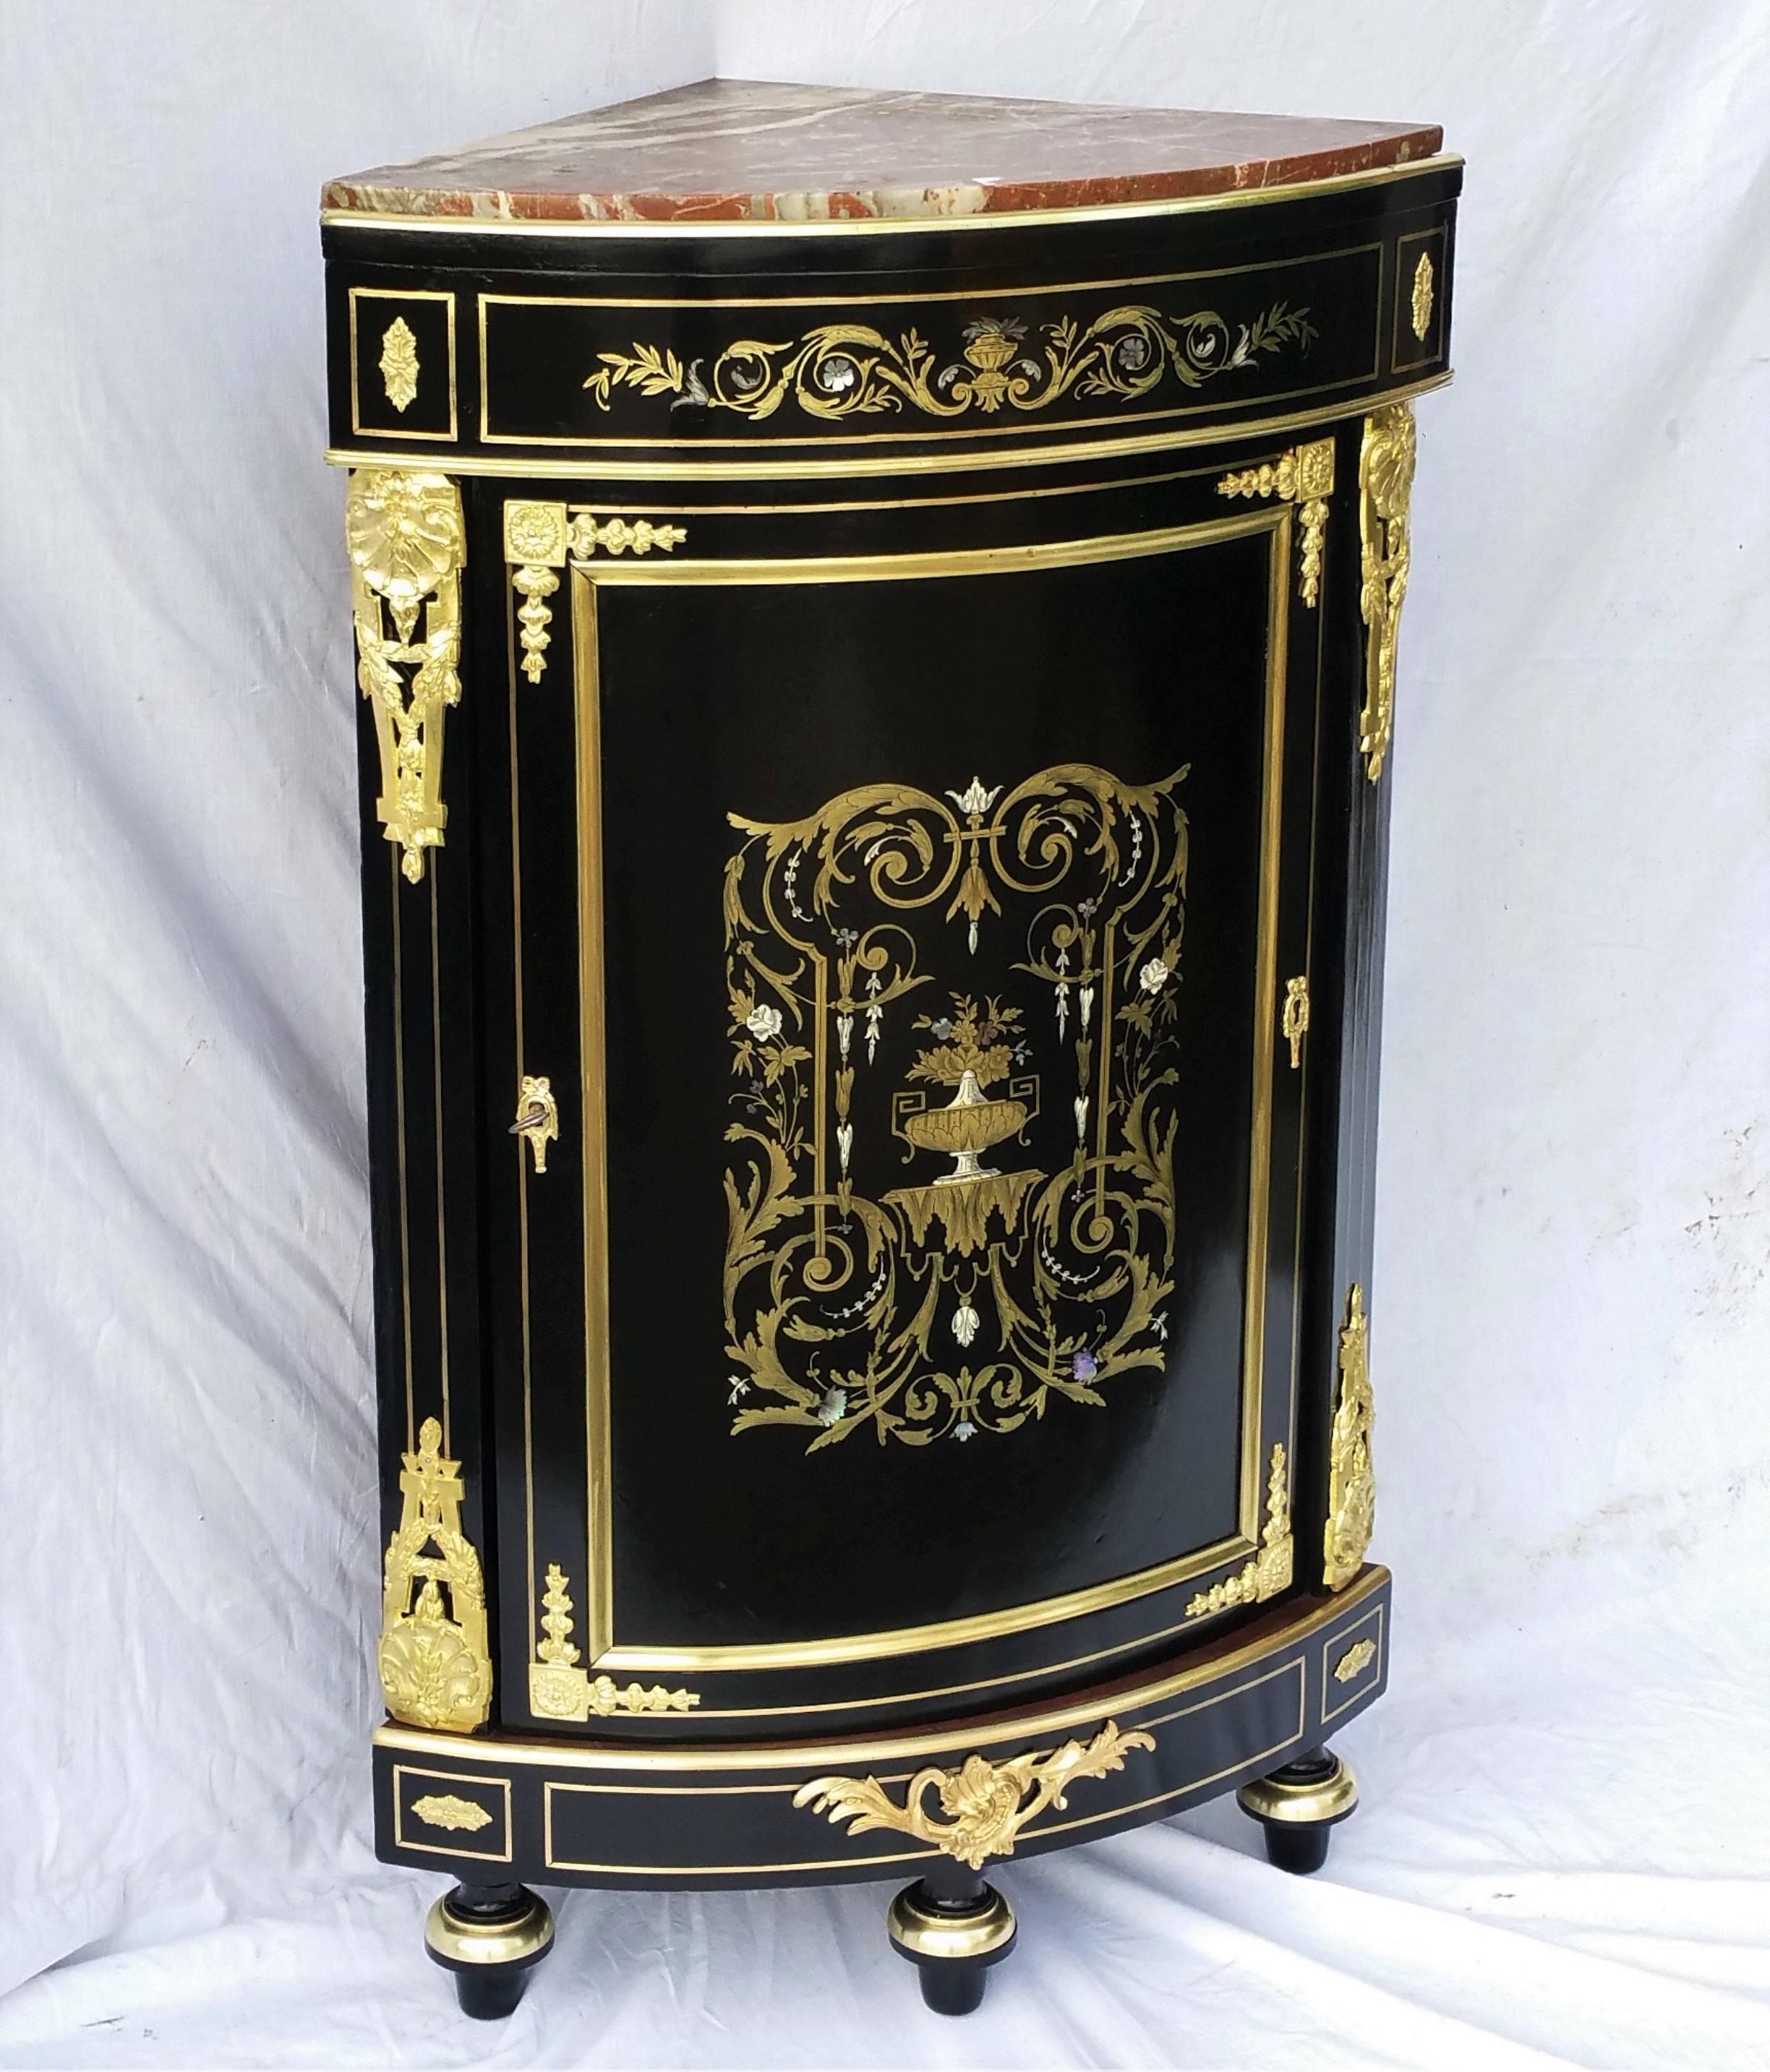 Very rare model of a corner cabinet in Boulle style marquetry beautifully decorated with brass, bones and mother-of-pearl.
Gorgeous gilt polished bronze and the inside part in mahogany color with one shelf and its key.
Griotte marble in good